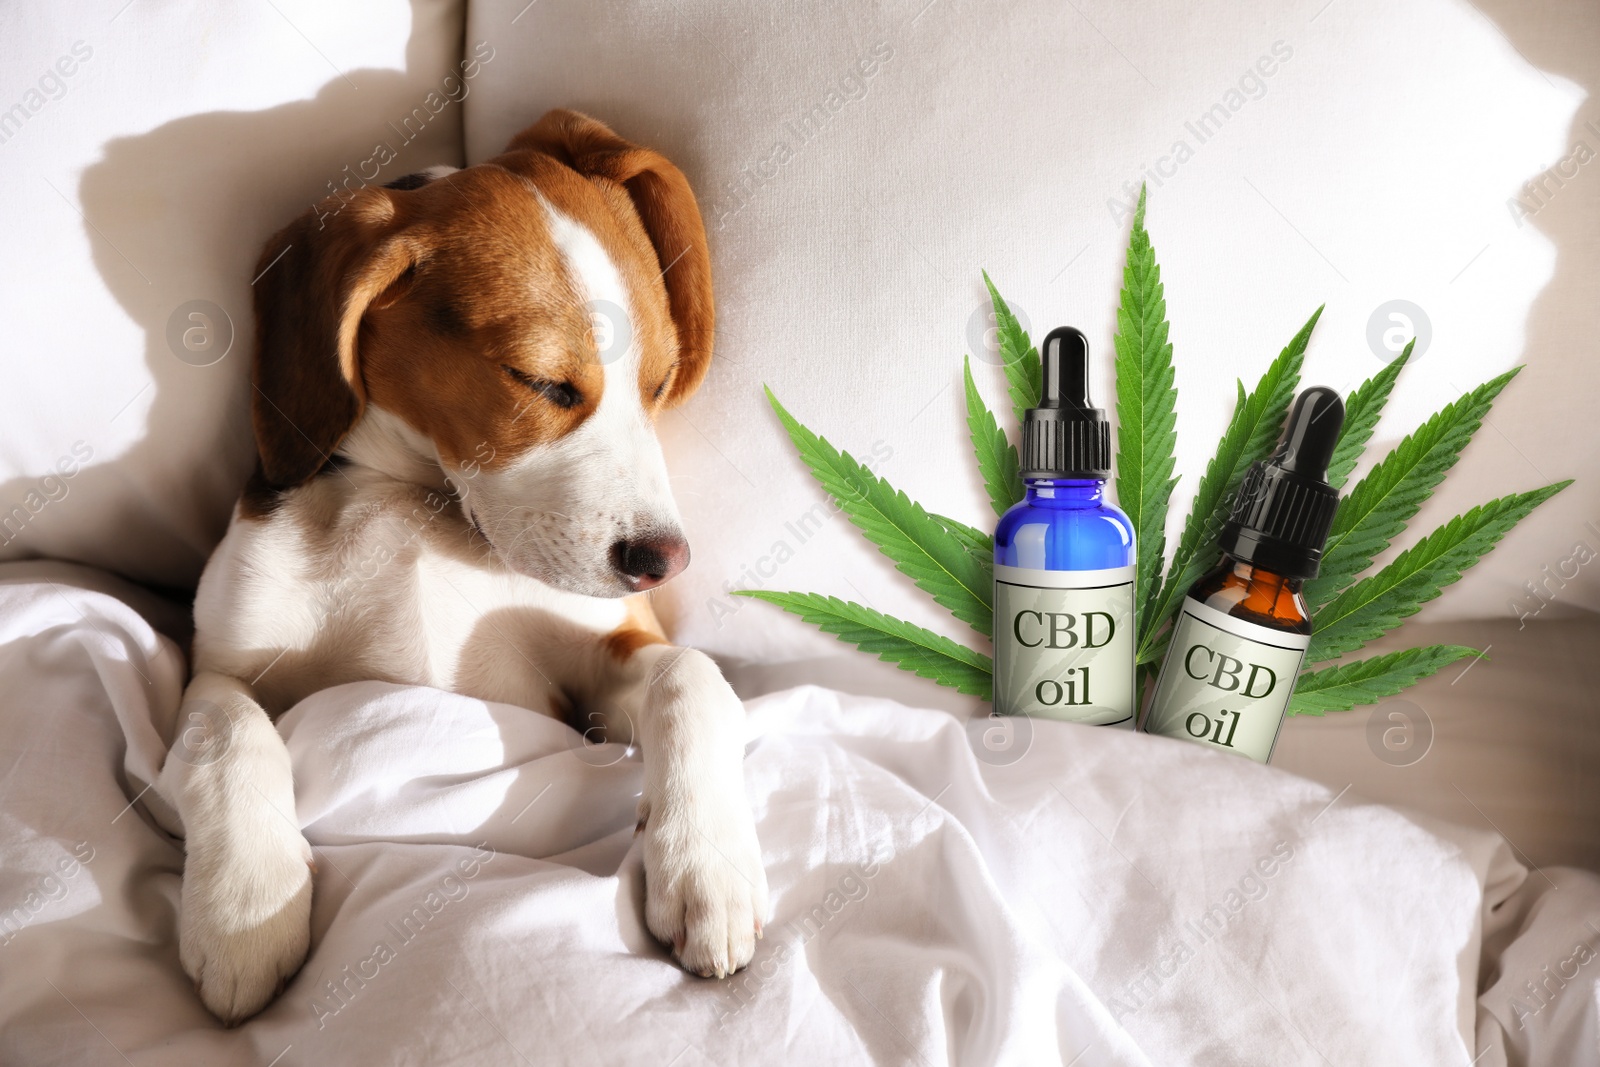 Image of Bottles of CBD oil and cute dog sleeping in bed, top view 